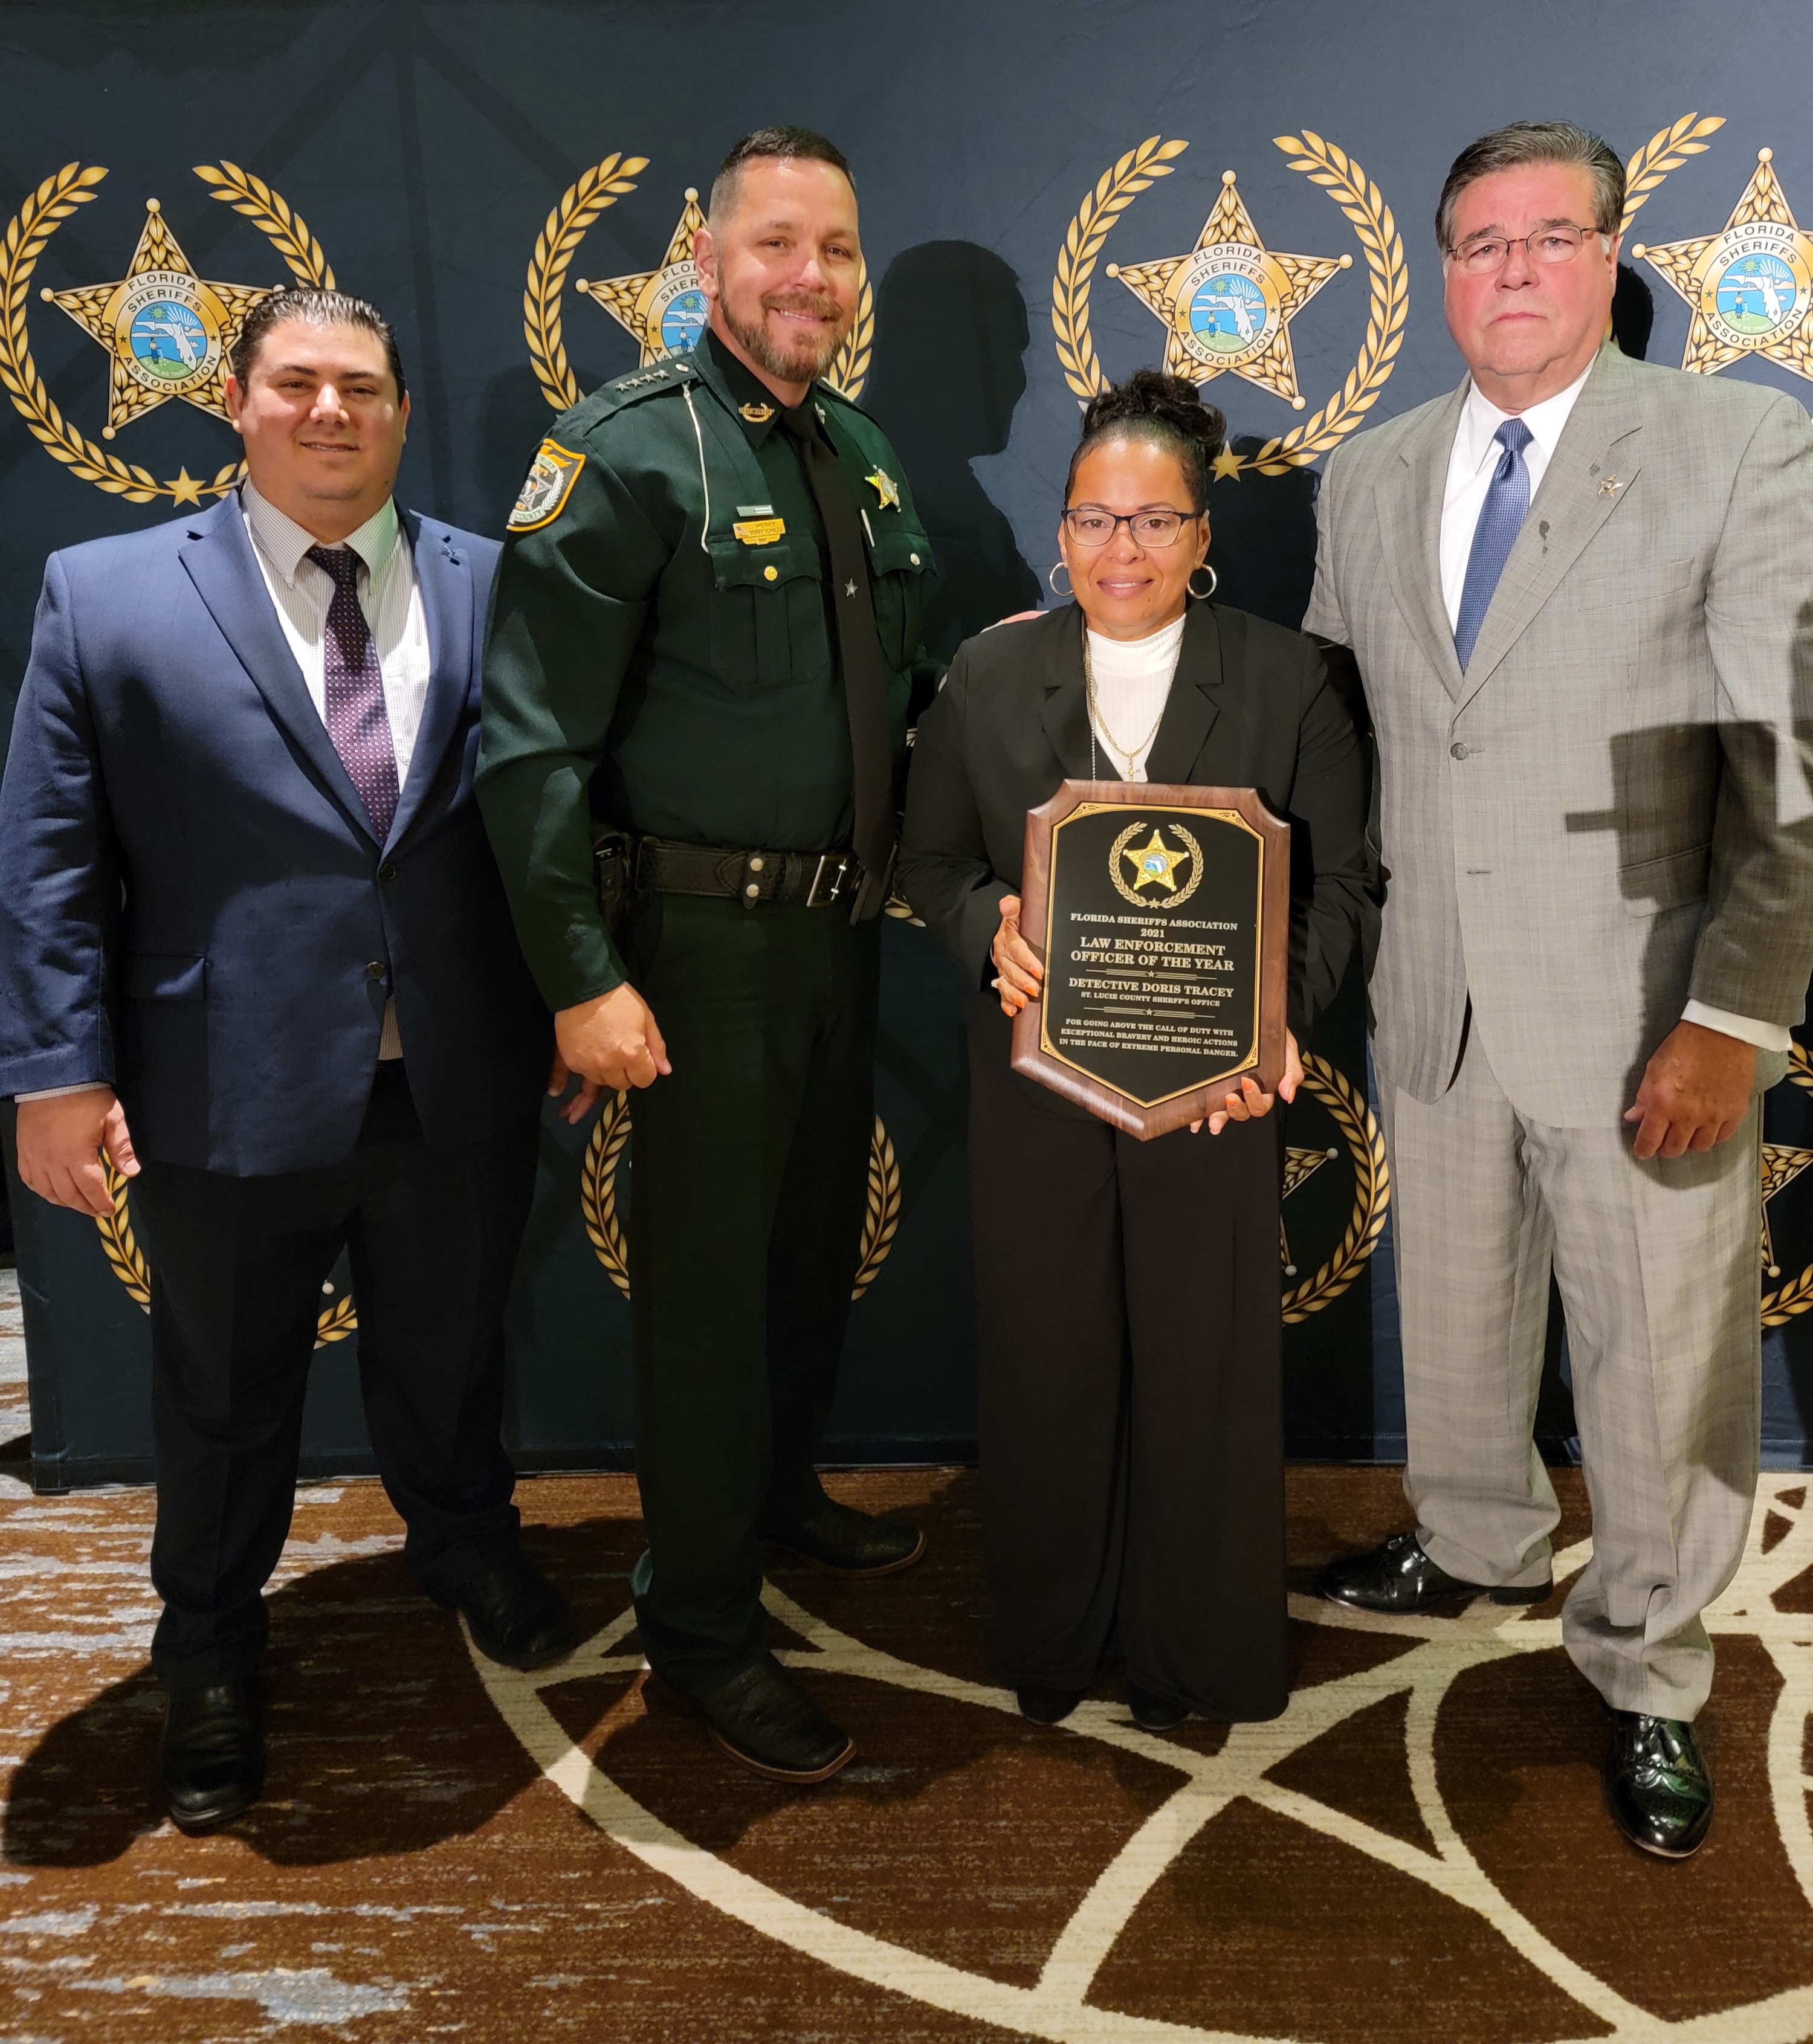 SaferWatch President Geno Roefaro, Gilchrist County Sheriff Bobby Schultz, Detective Doris Tracey of the St. Lucie County Sheriff’s Office, St. Lucie County Sheriff Ken Mascara